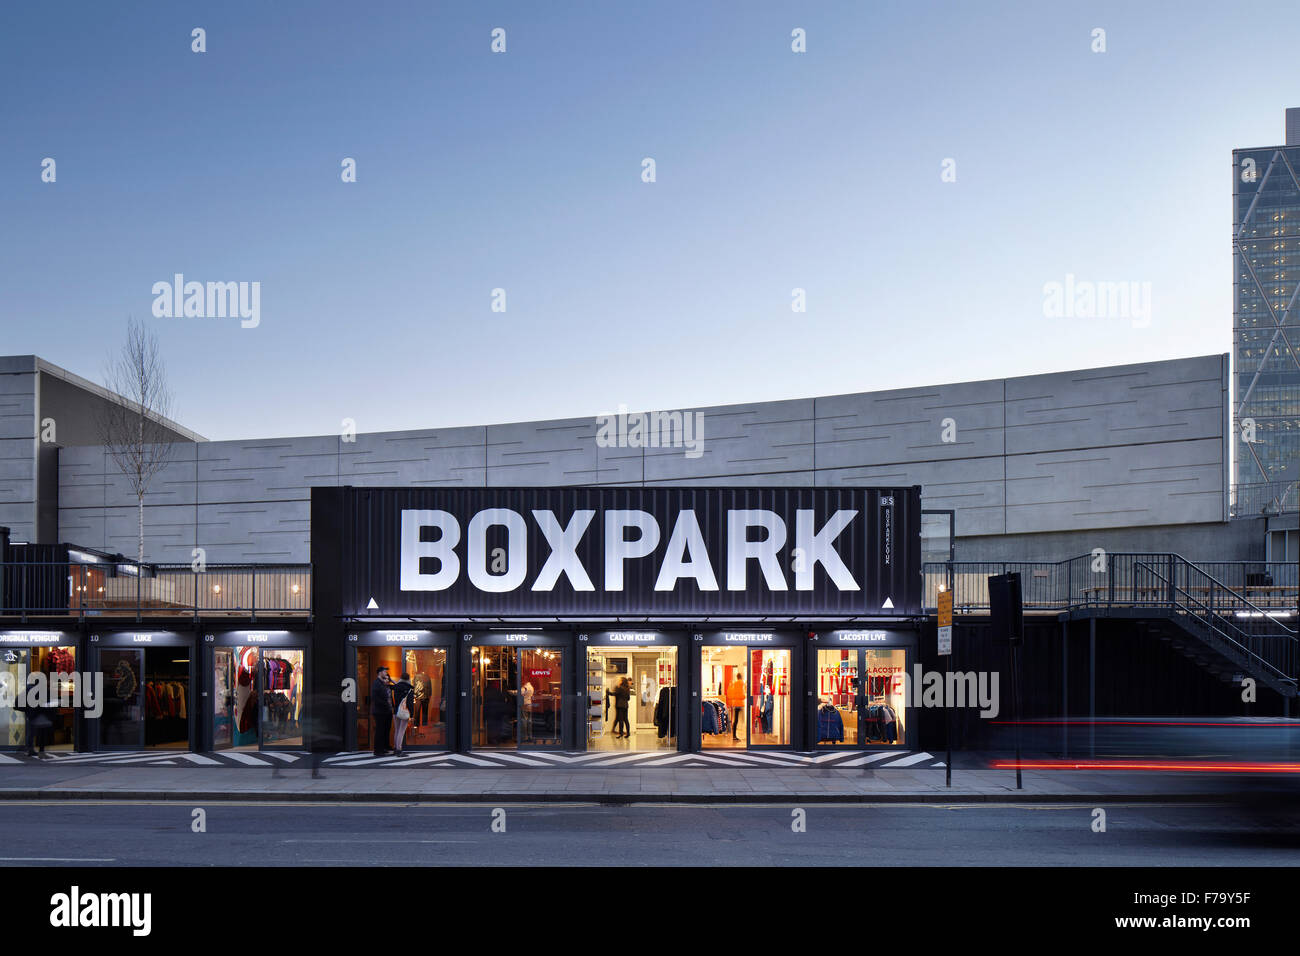 Boxpark High Resolution Stock Photography and Images - Alamy